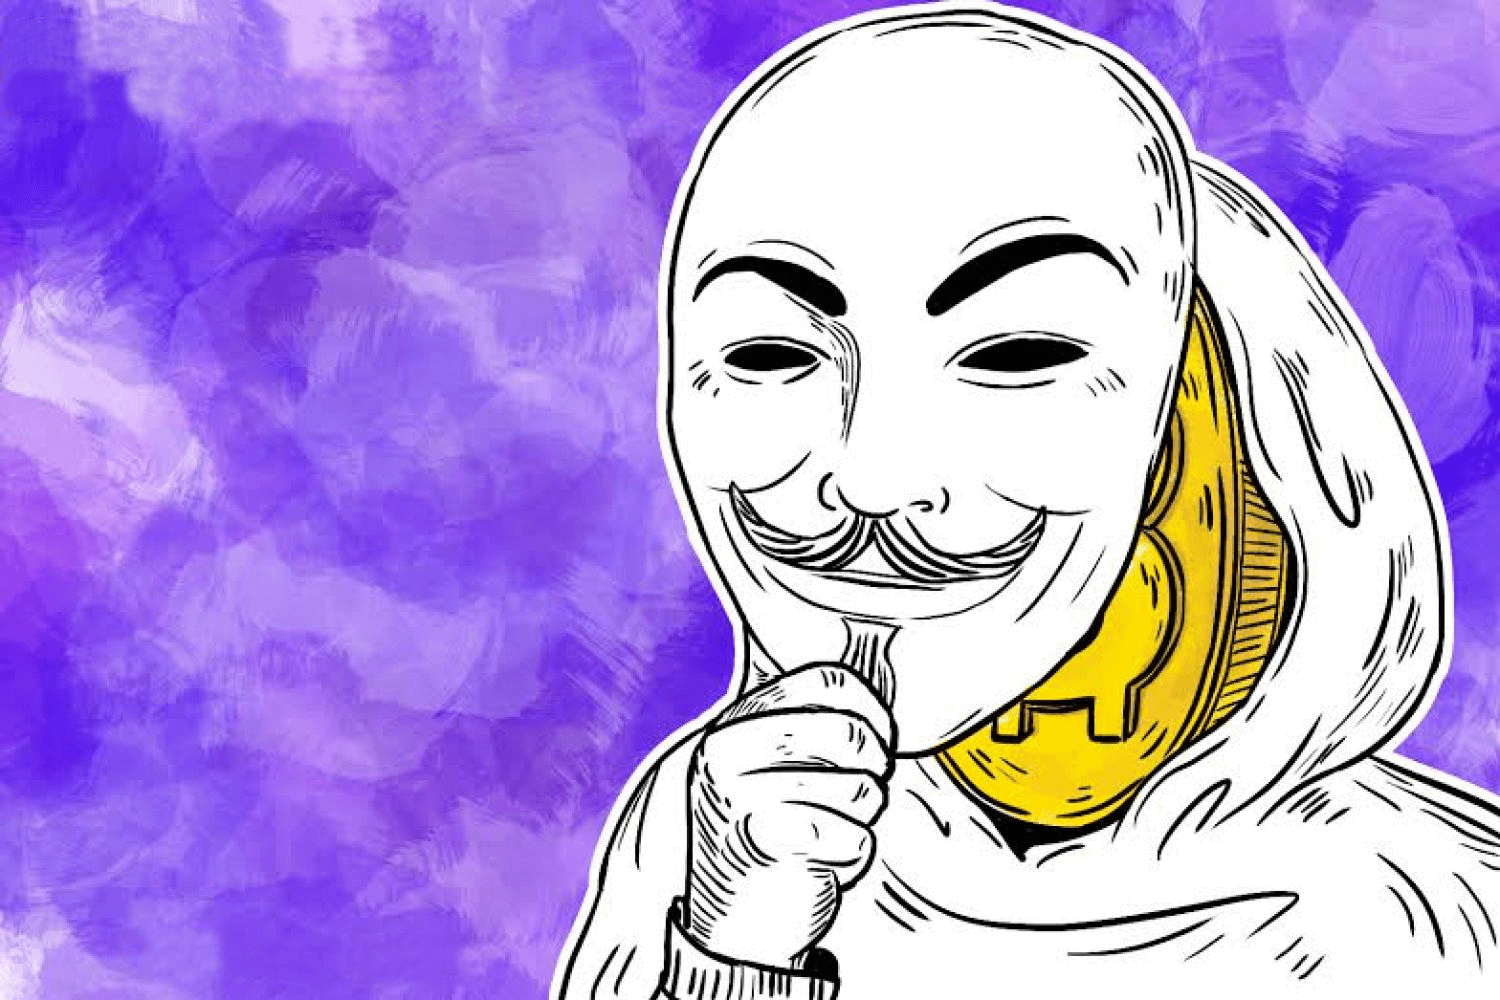 where to buy bitcoins anonymously